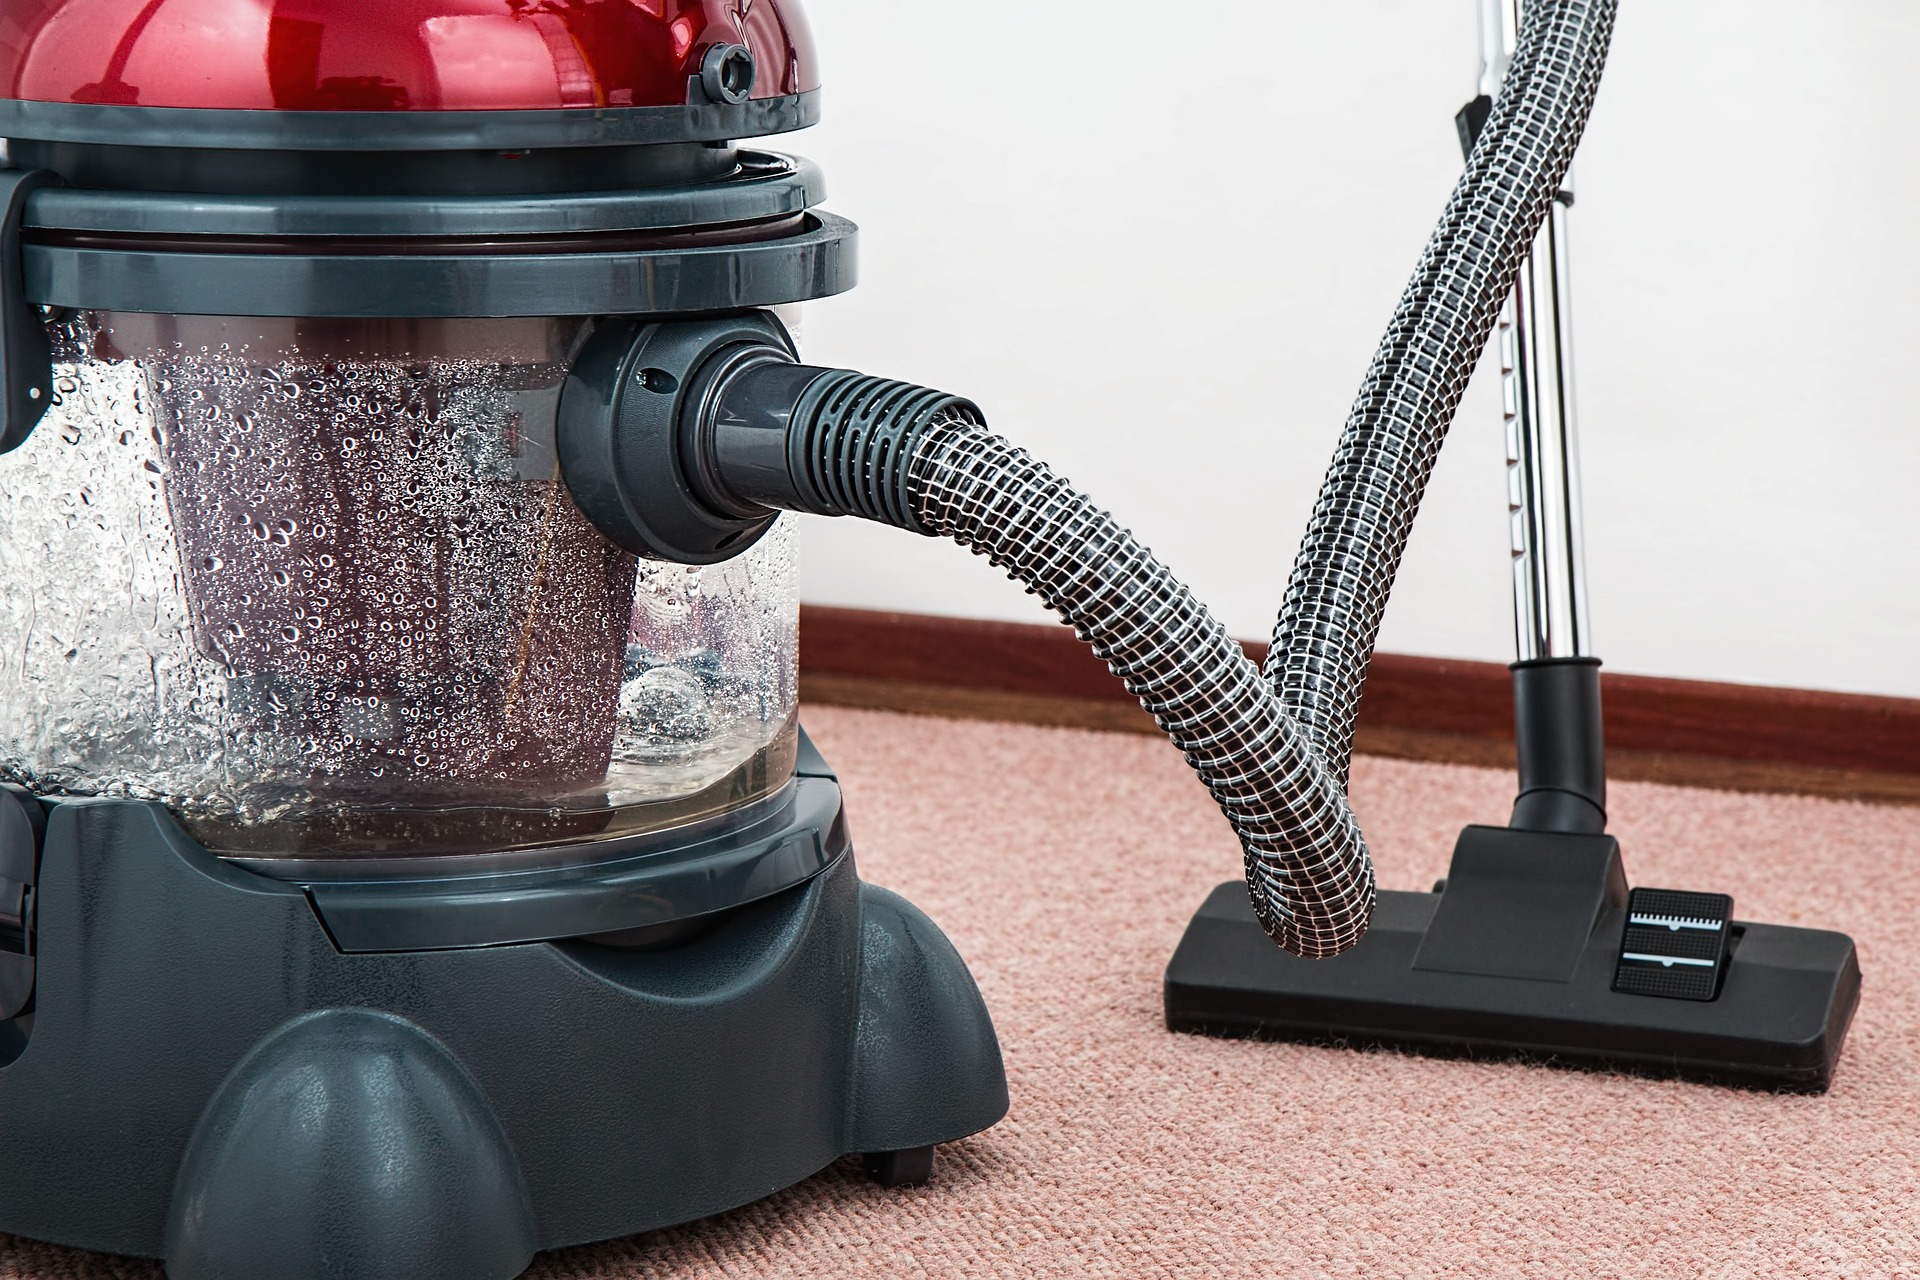  Specialized carpet cleaning service in progress, employing advanced techniques and equipment to remove stains, dirt, and allergens, restoring the carpet to a fresh and revitalized state